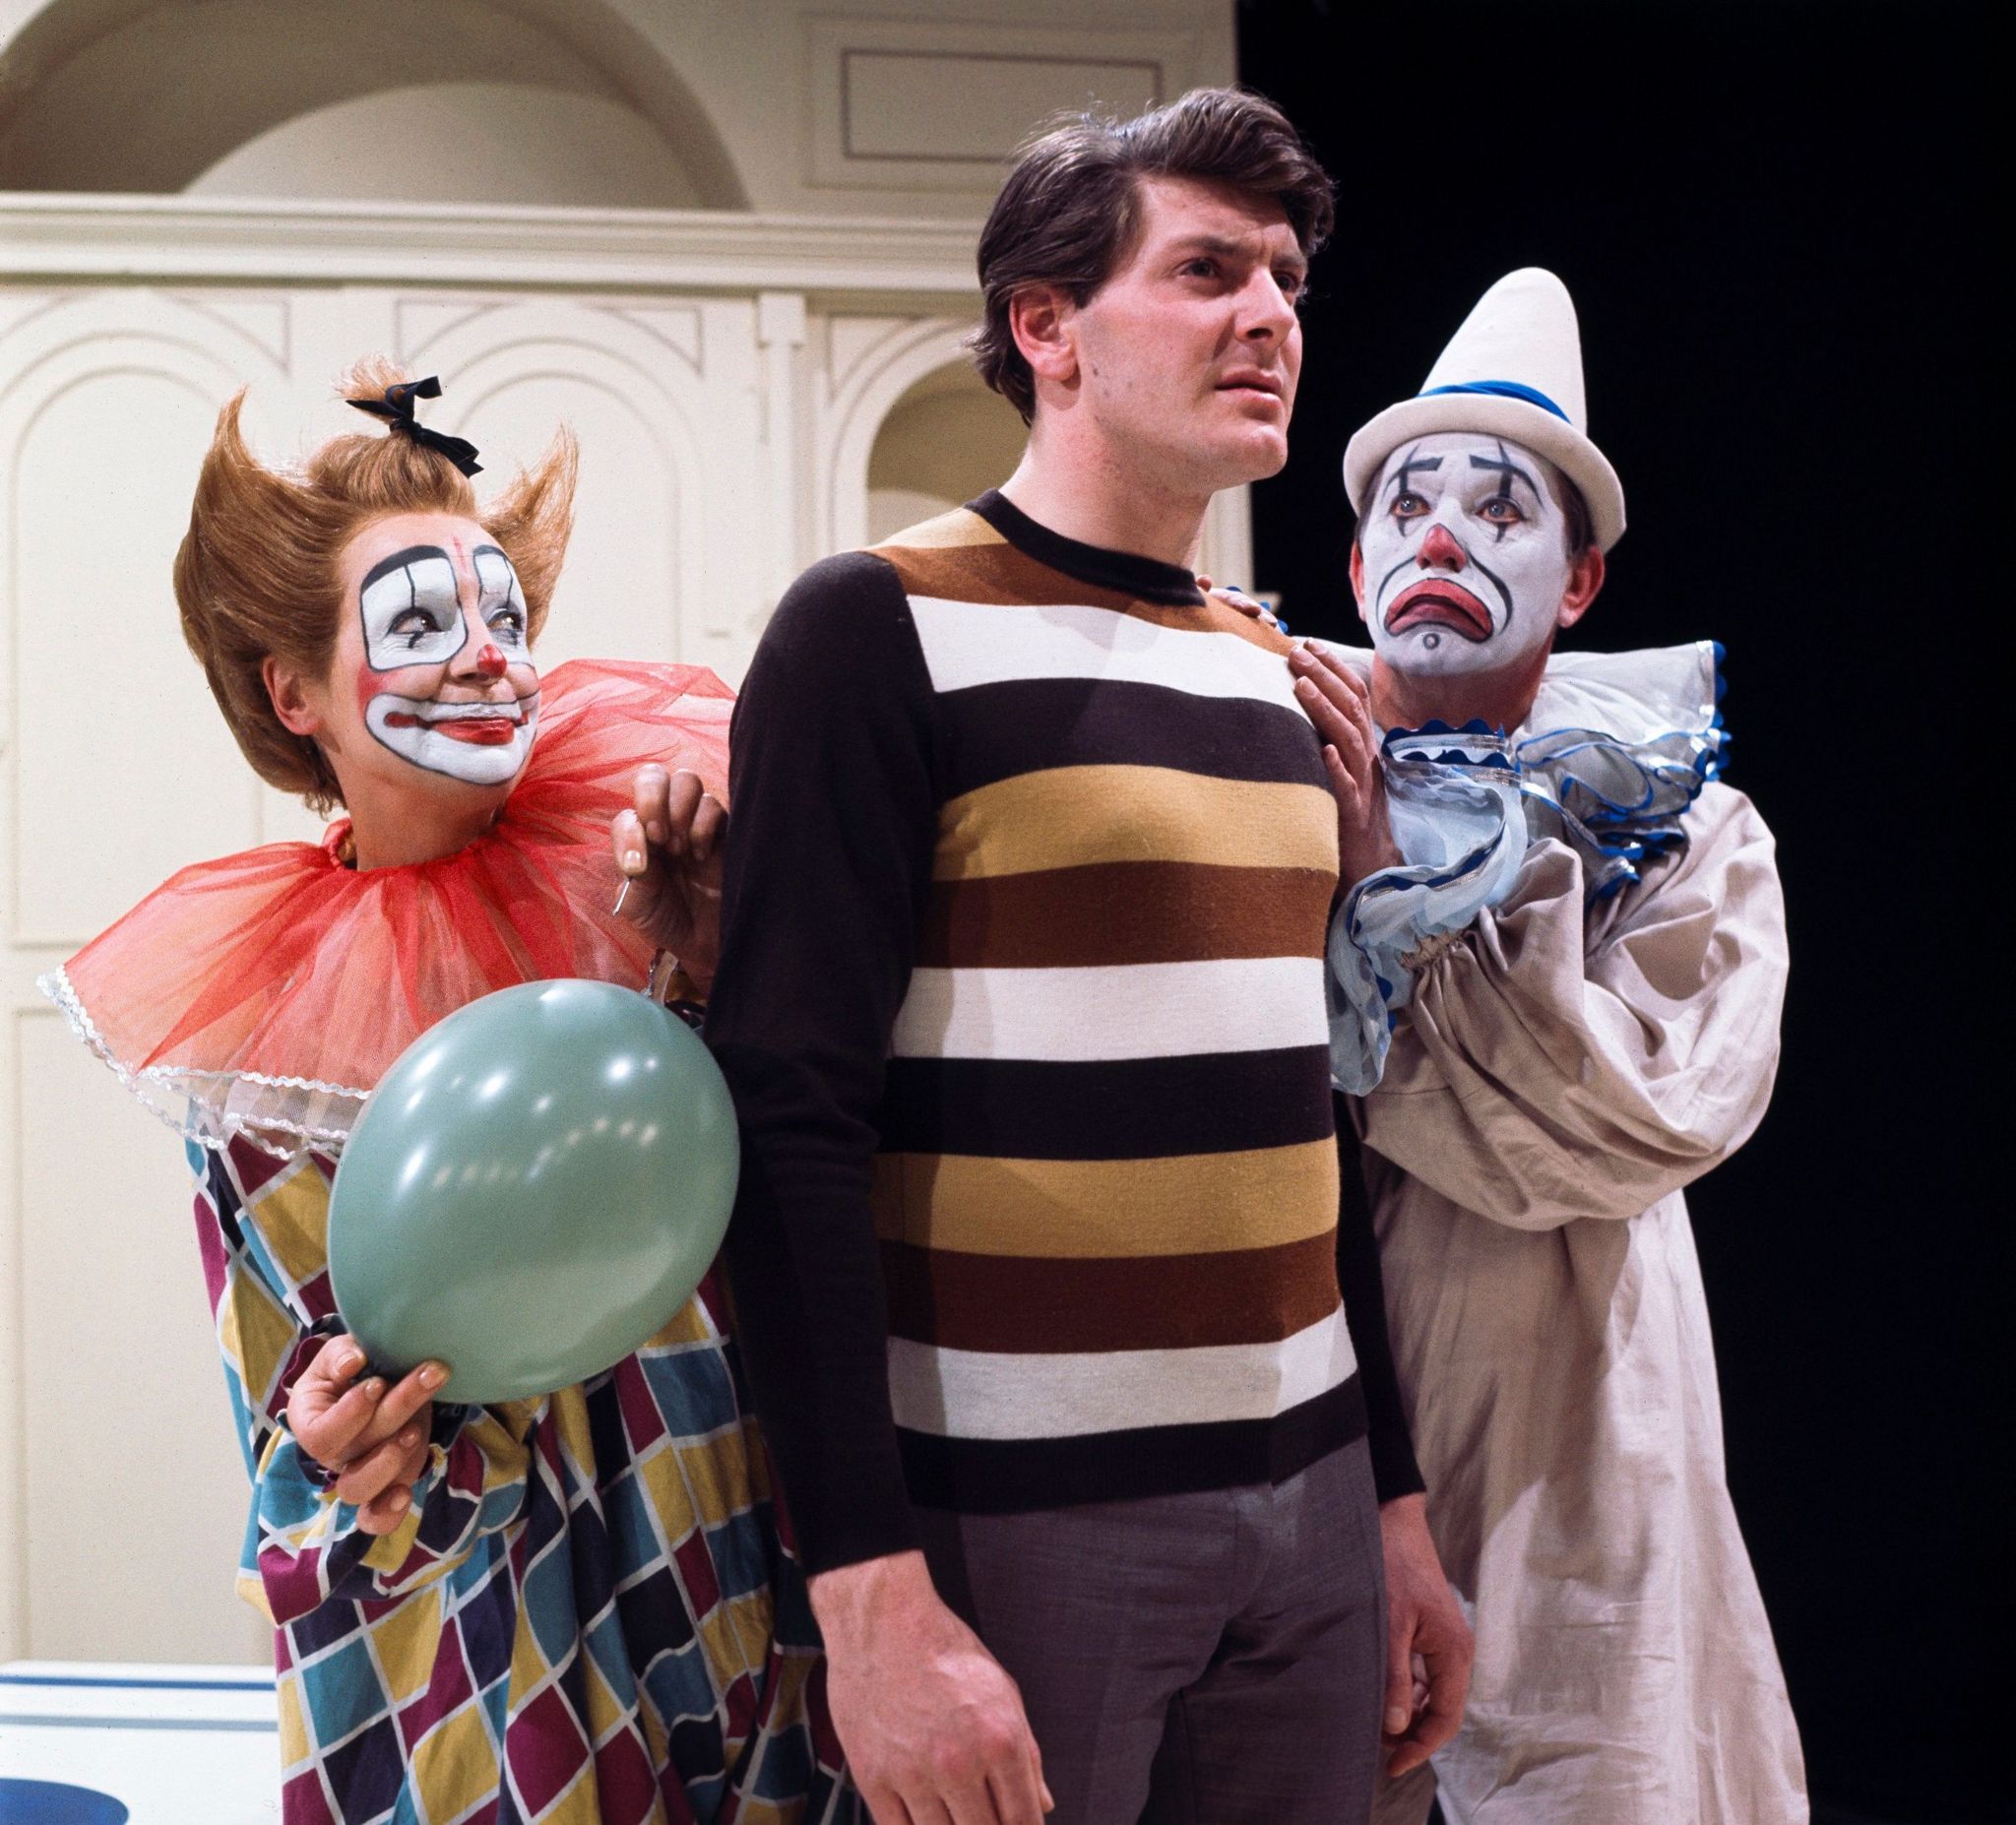 Do you want to play a game? Carmen Silvera (Clara), Peter Purves (Steven) and Campbell Singer (Joey the Clown) in The Celestial Toymaker (1966)